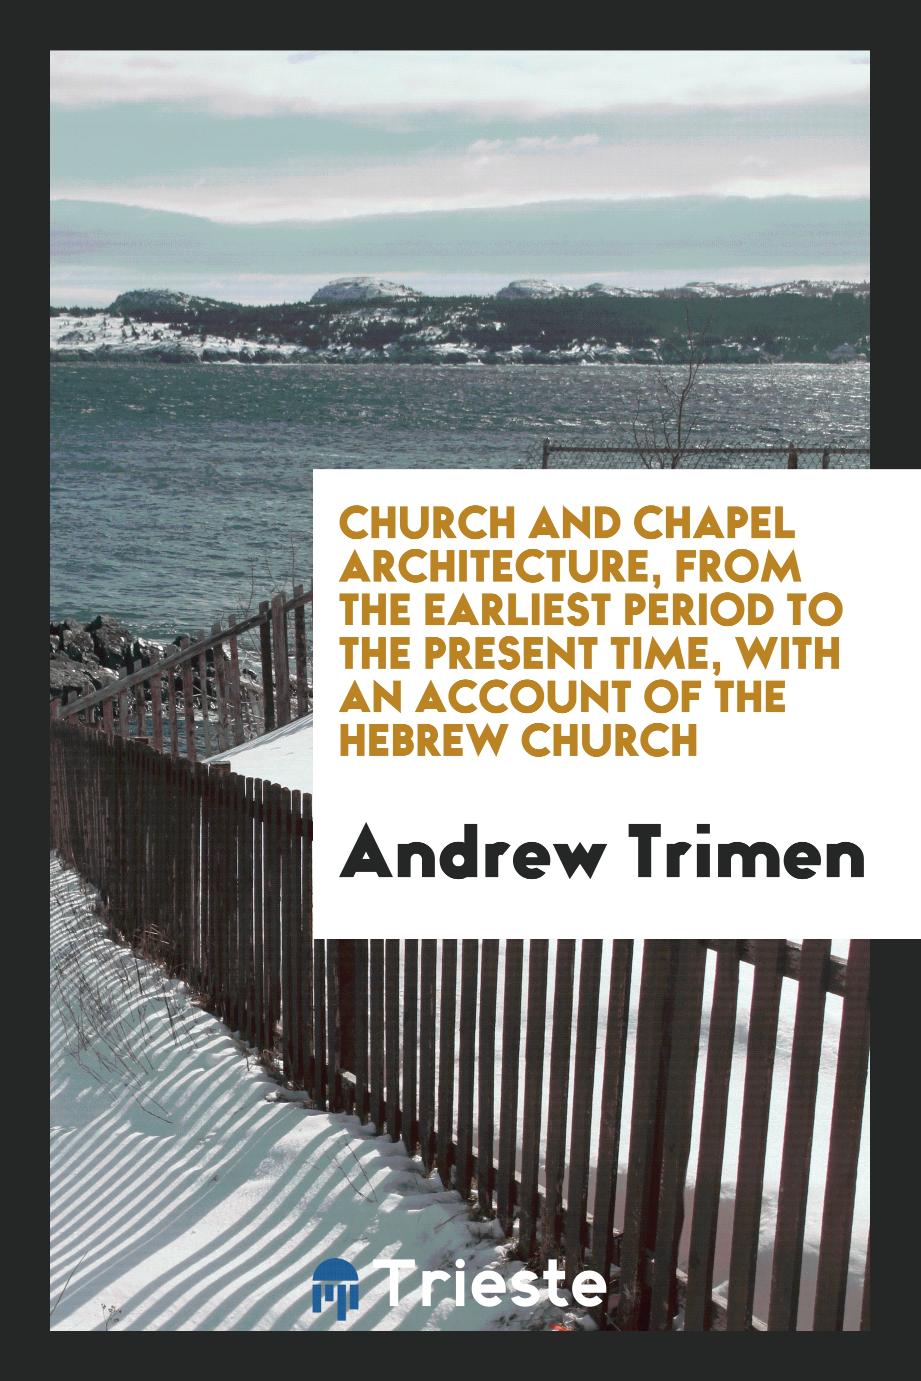 Church and Chapel Architecture, from the Earliest Period to the Present Time, with an Account of the Hebrew Church